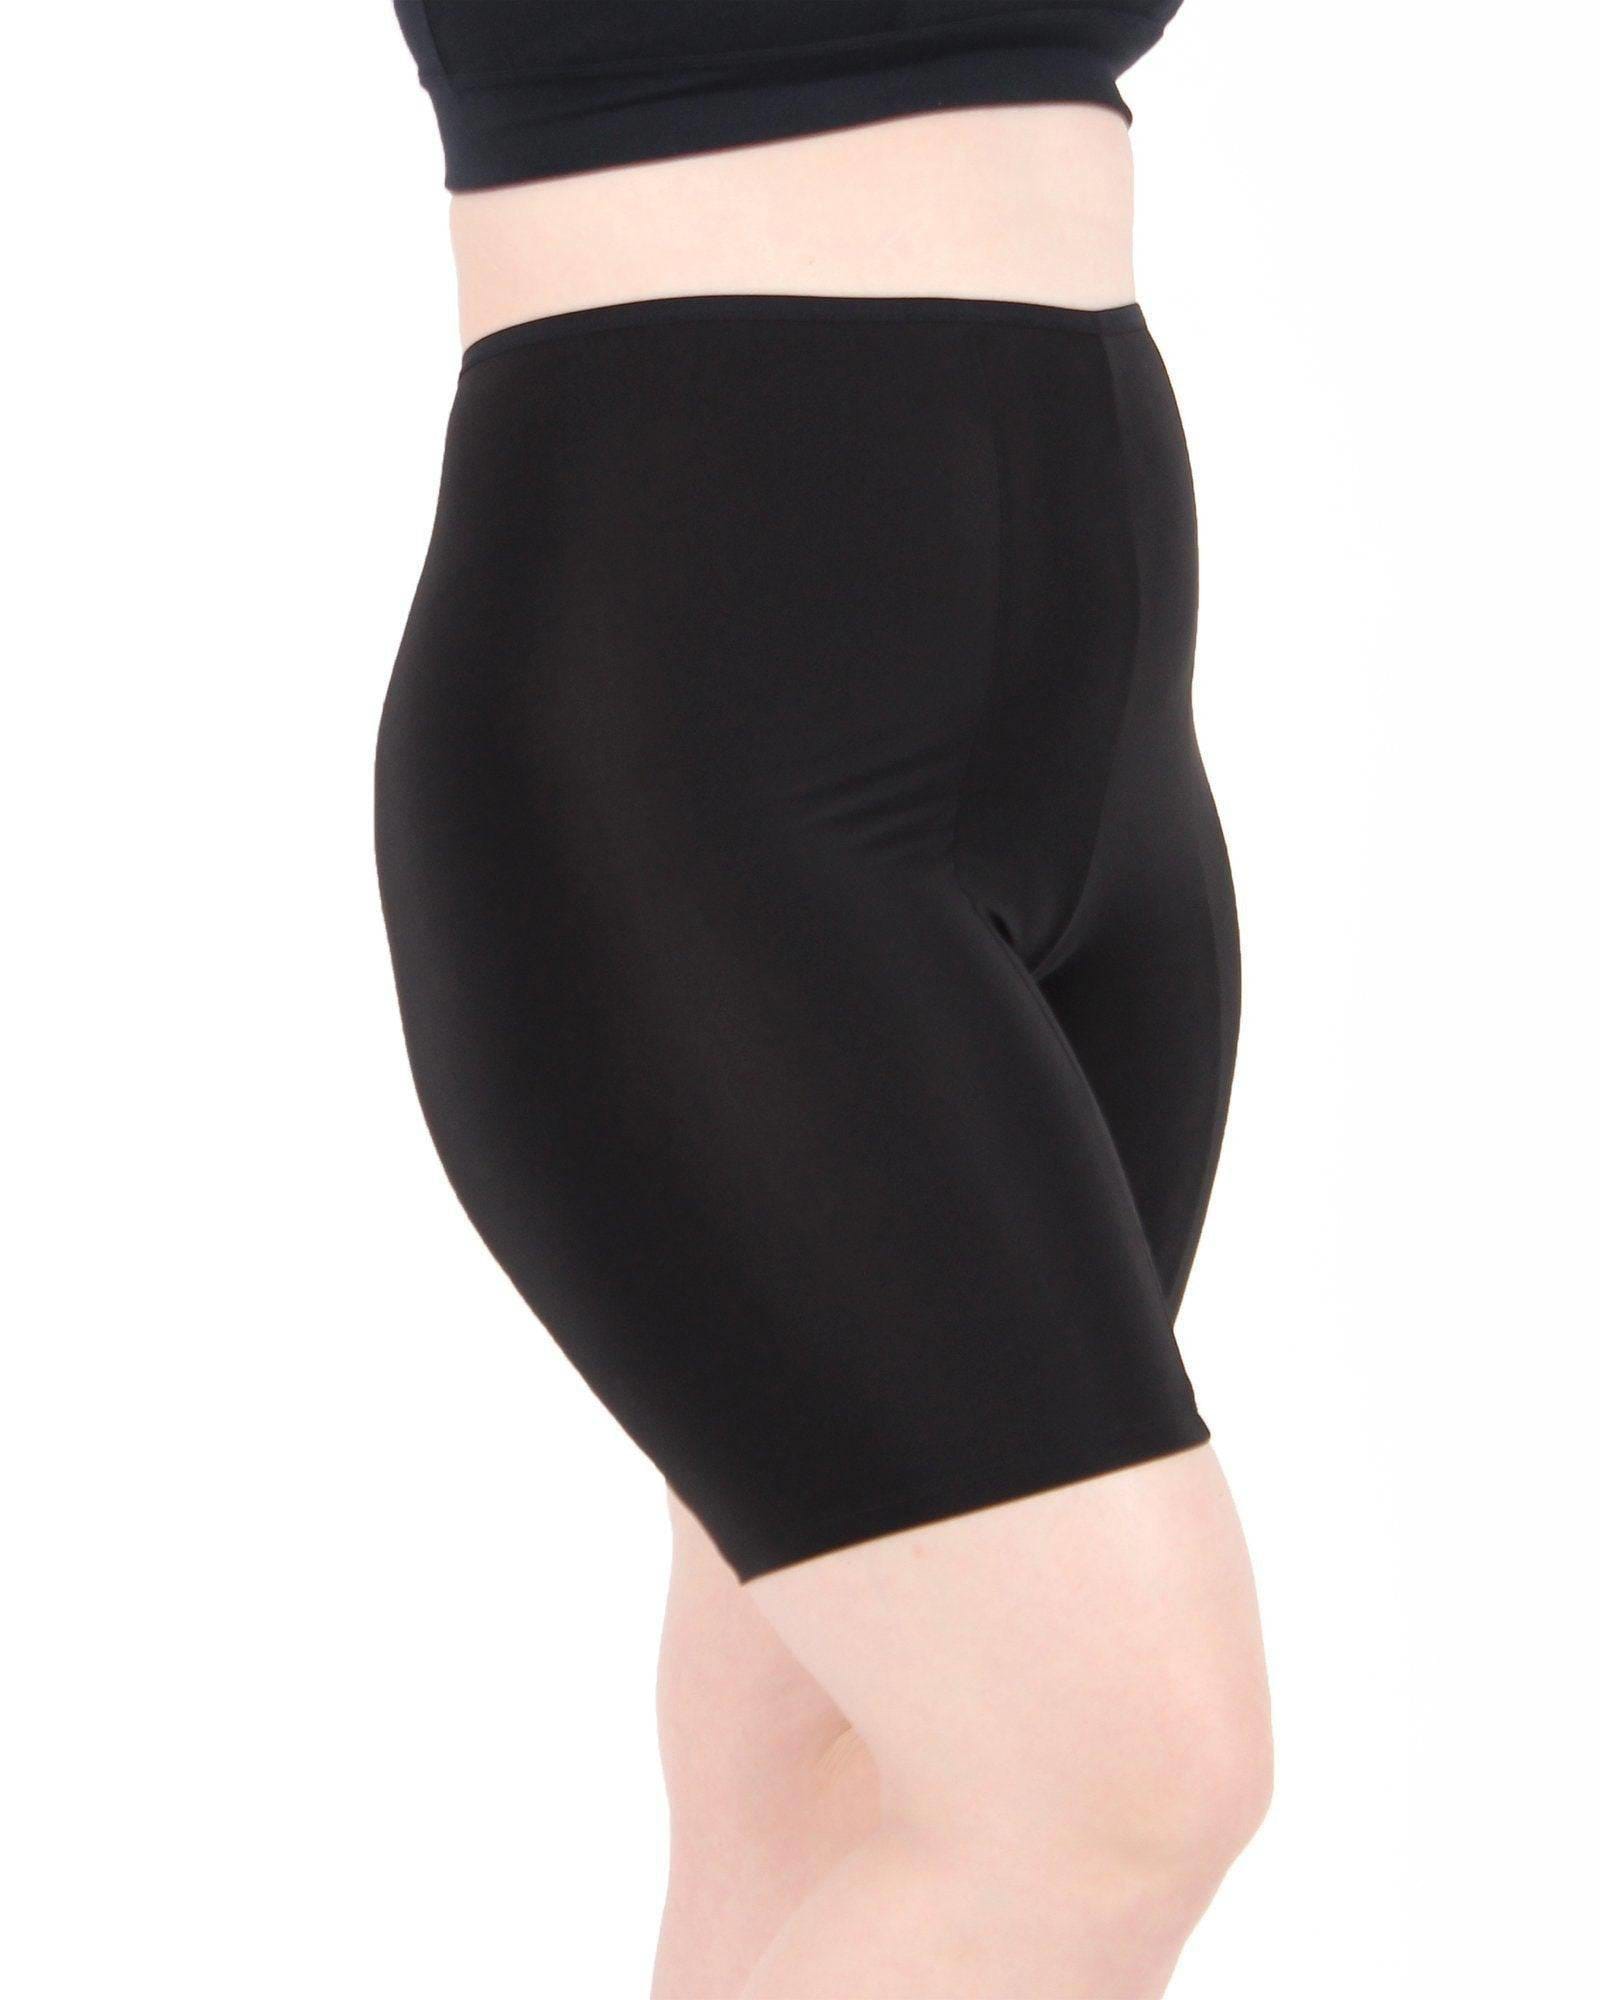 Undersummers Fusion Slip Shorts, Shortlette Thigh Anti Chafing